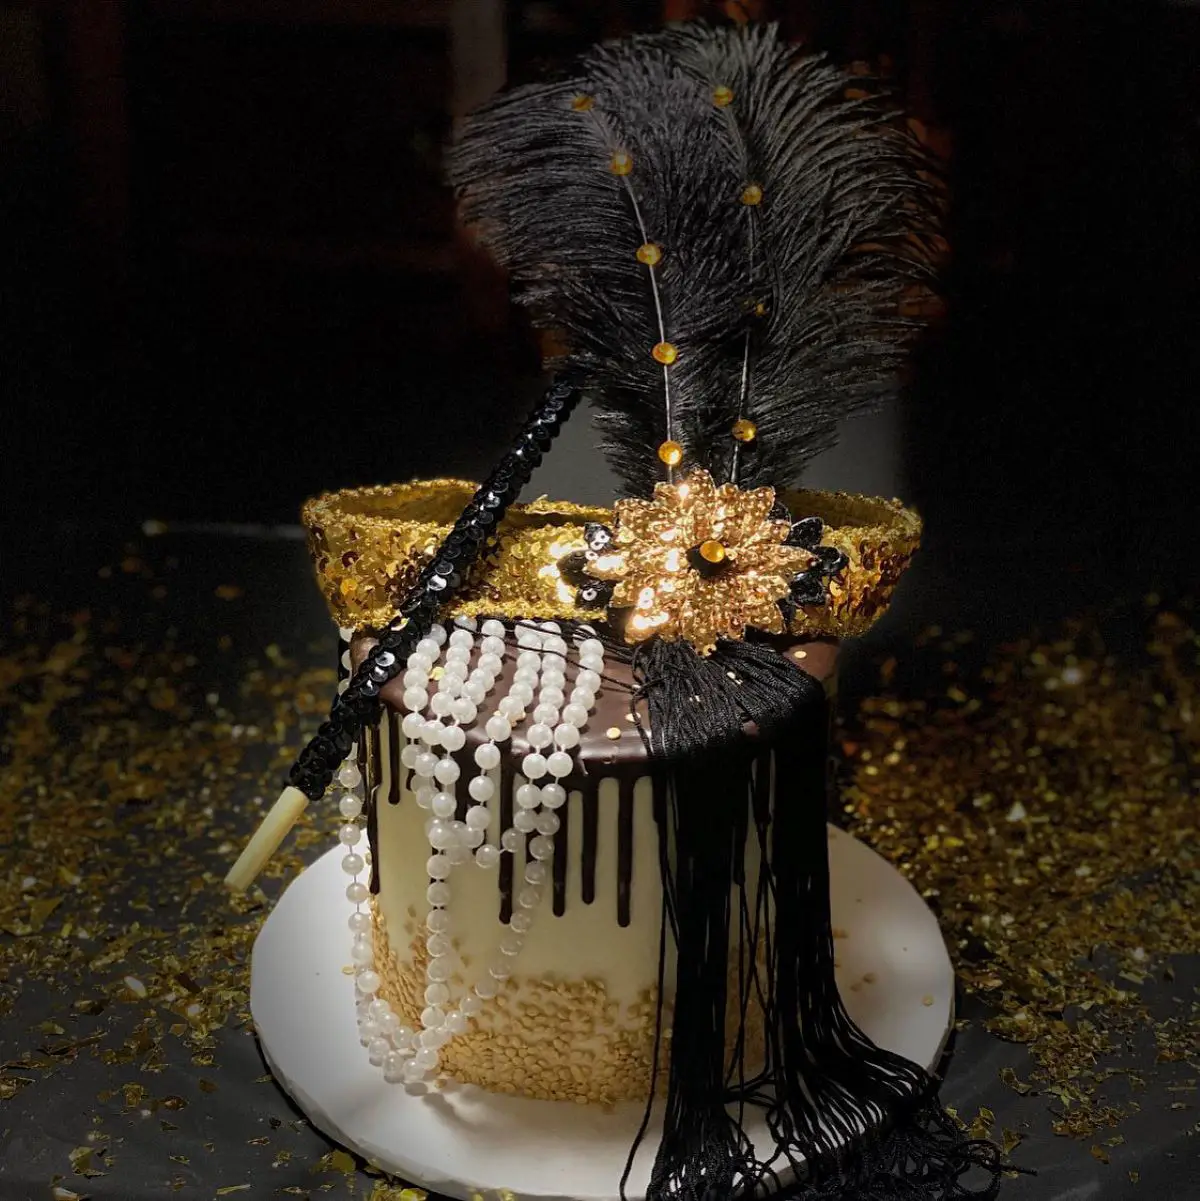 A Great Gatsby cake decorated with featherss and pearls.